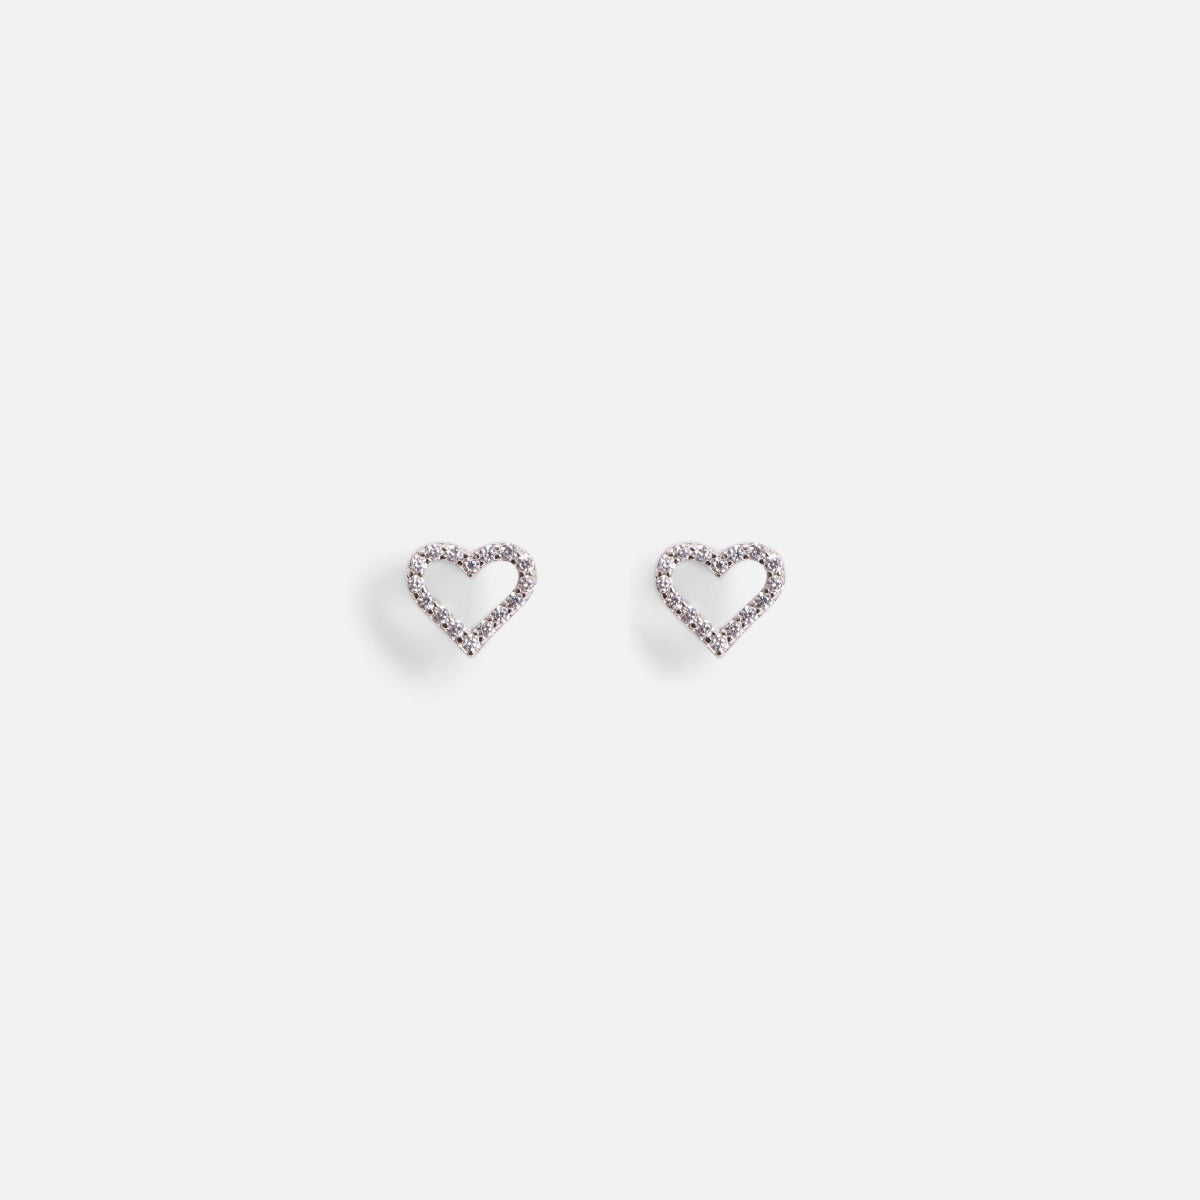 Sterling silver earrings hearts and cubic zirconia stones